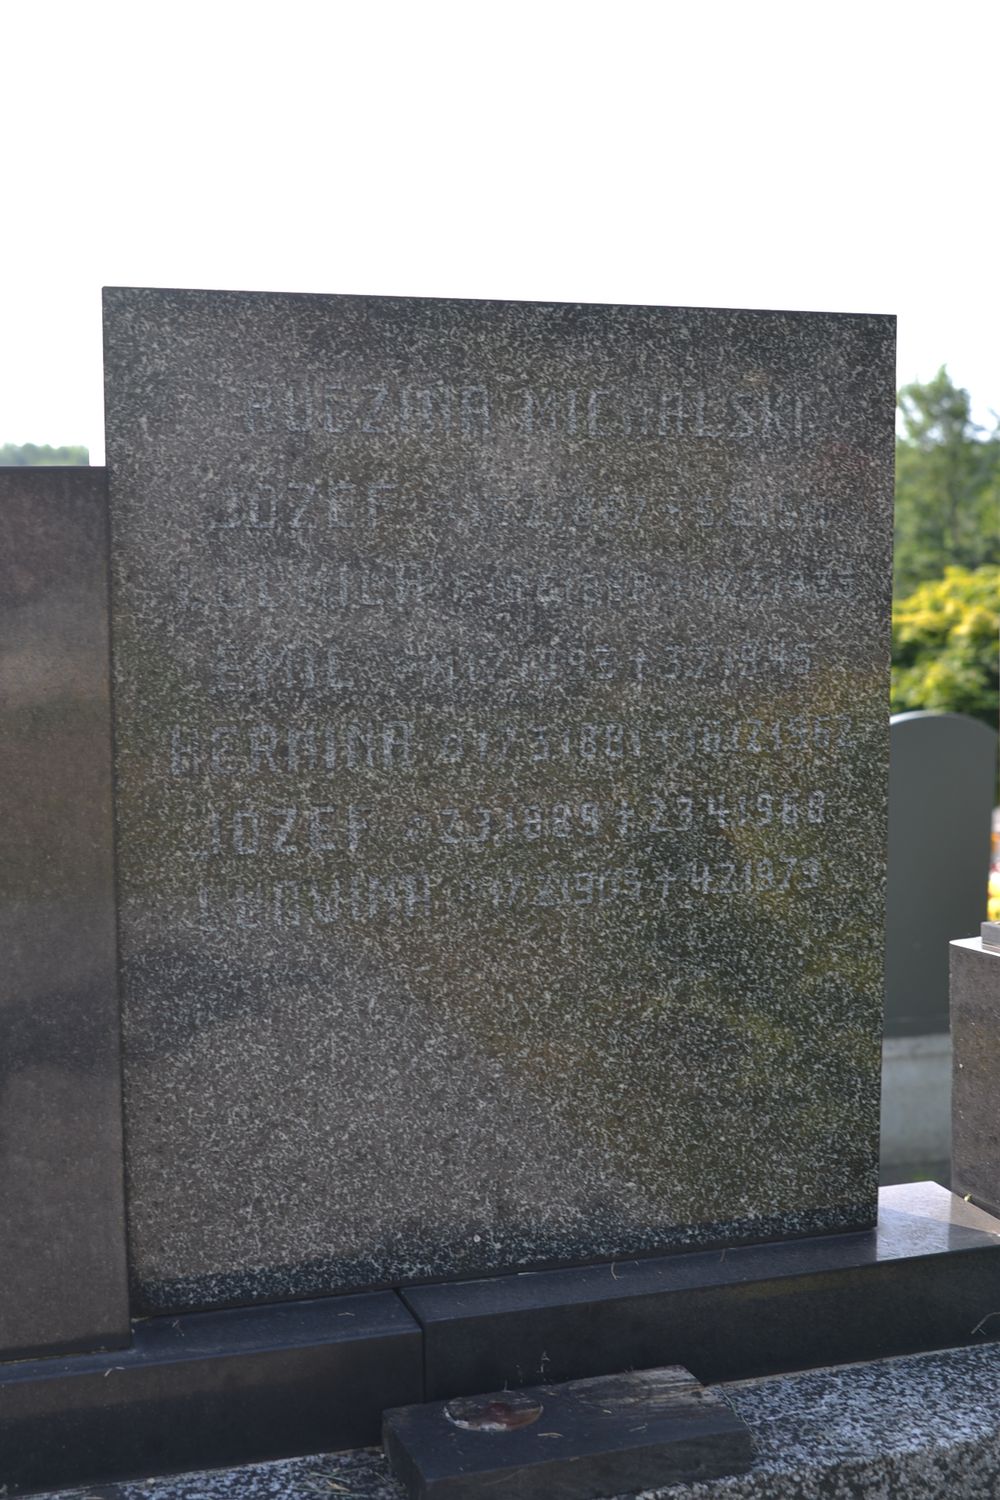 Inscription plaque of the tomb of the Michalski family, cemetery in Karviná Doły, Czech Republic, as of 2022